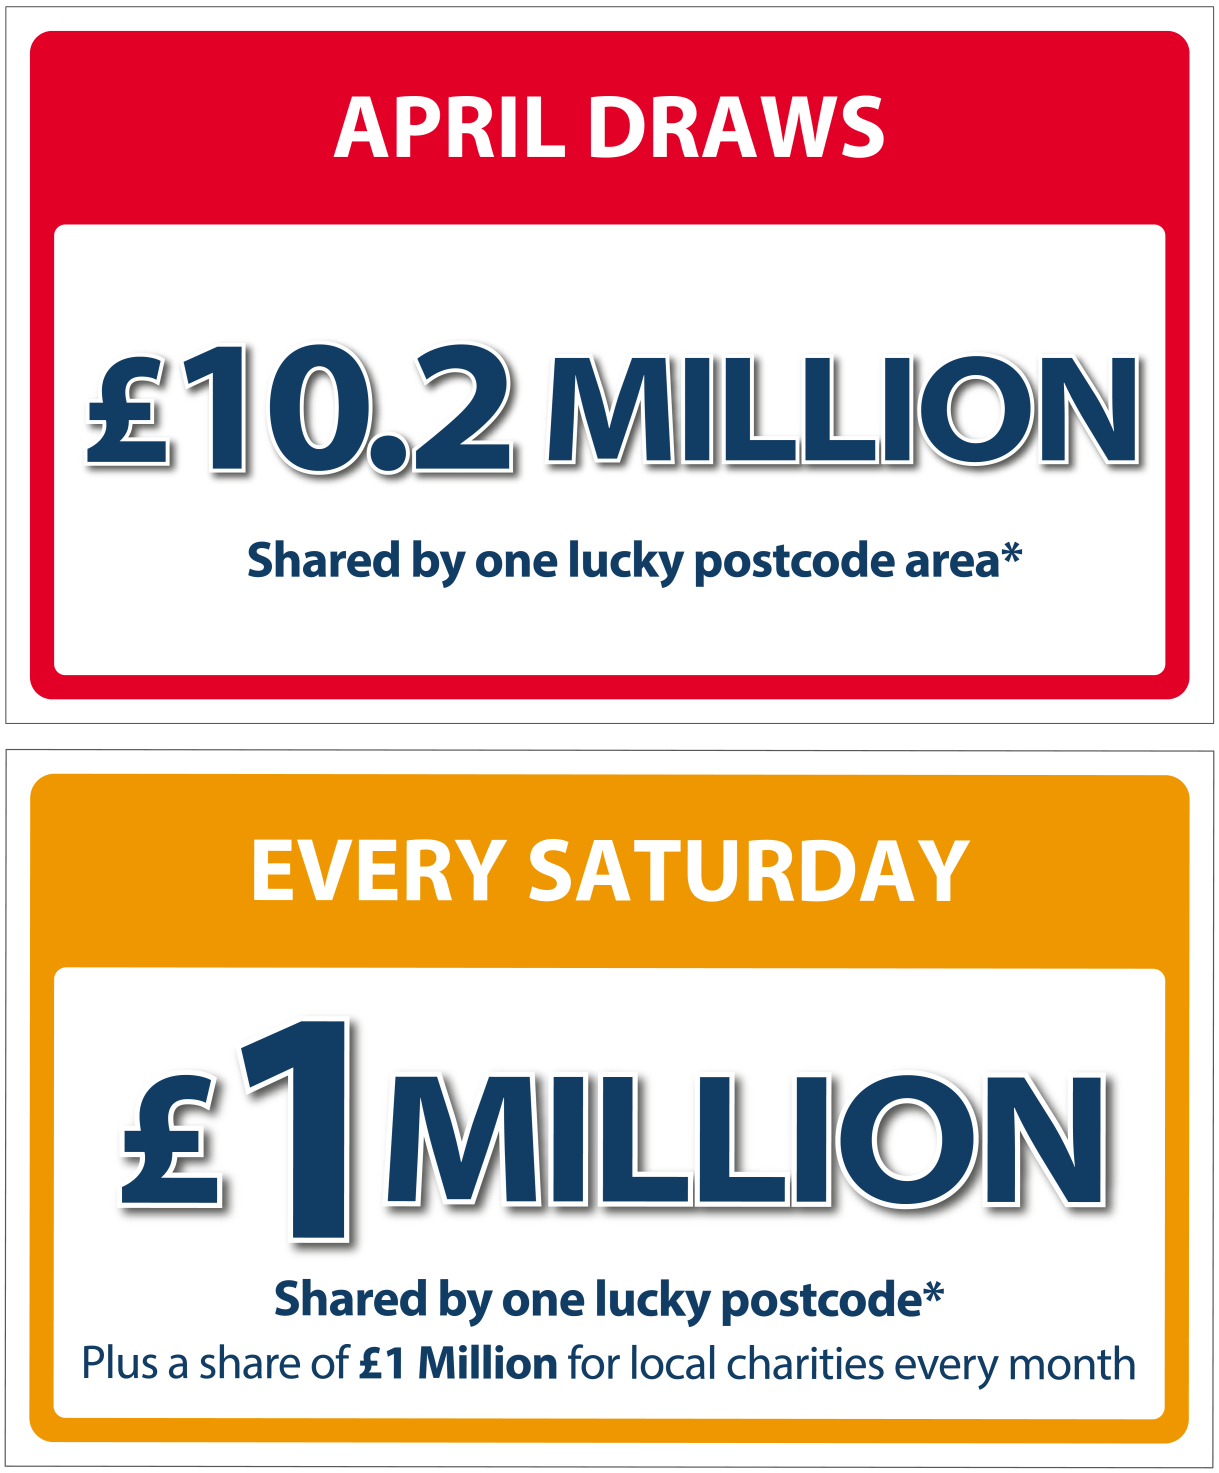 In the April draws £10.2 Million is shared by one lucky postcode area and every Saturday £1 Million is shared by one lucky postcode.